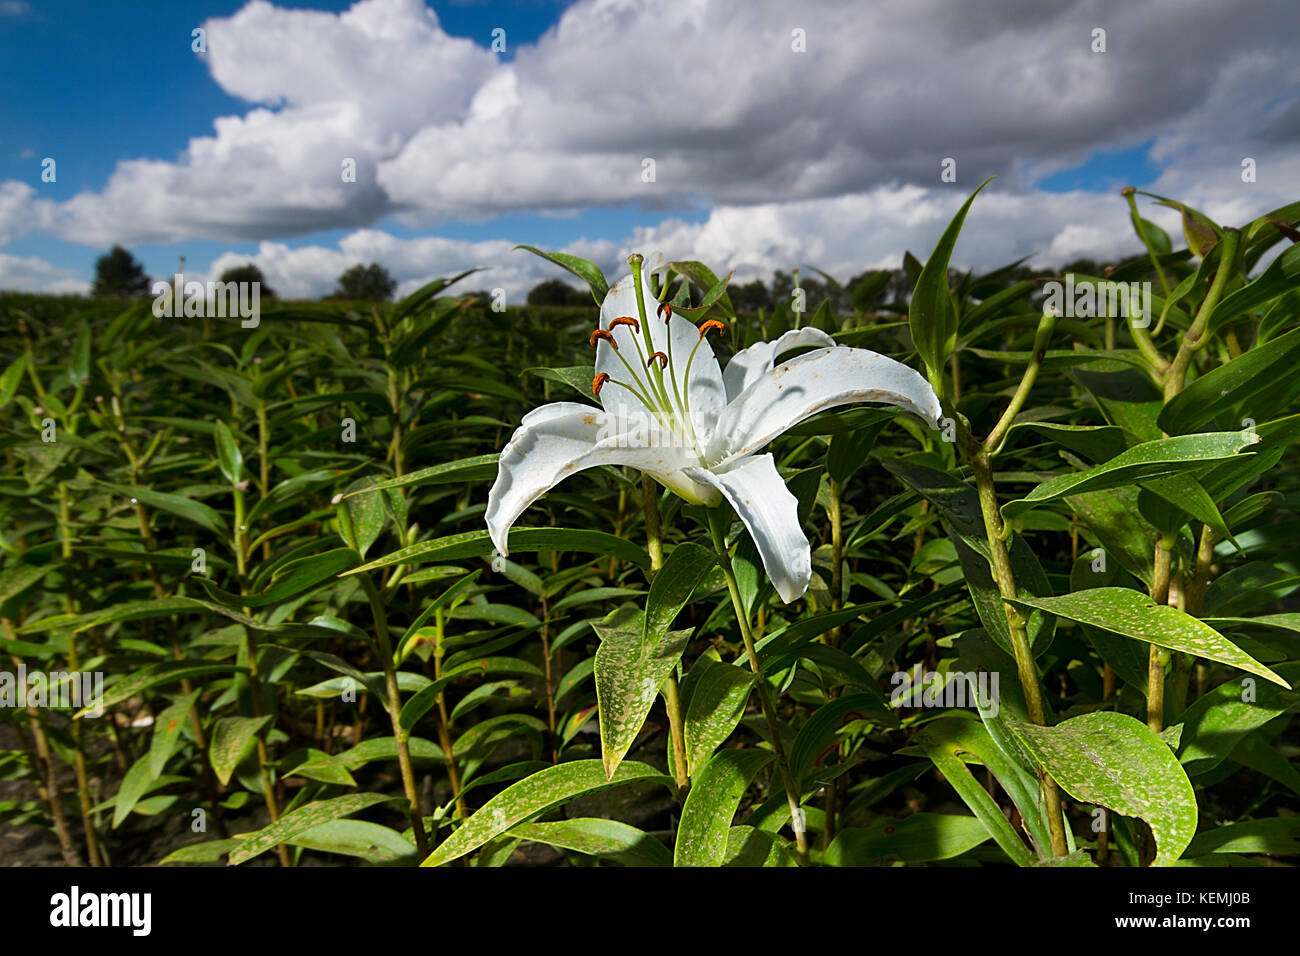 Cultivation of Lilies in agriculture, a field of Lilies with one white flower under a blue sky with clouds Stock Photo